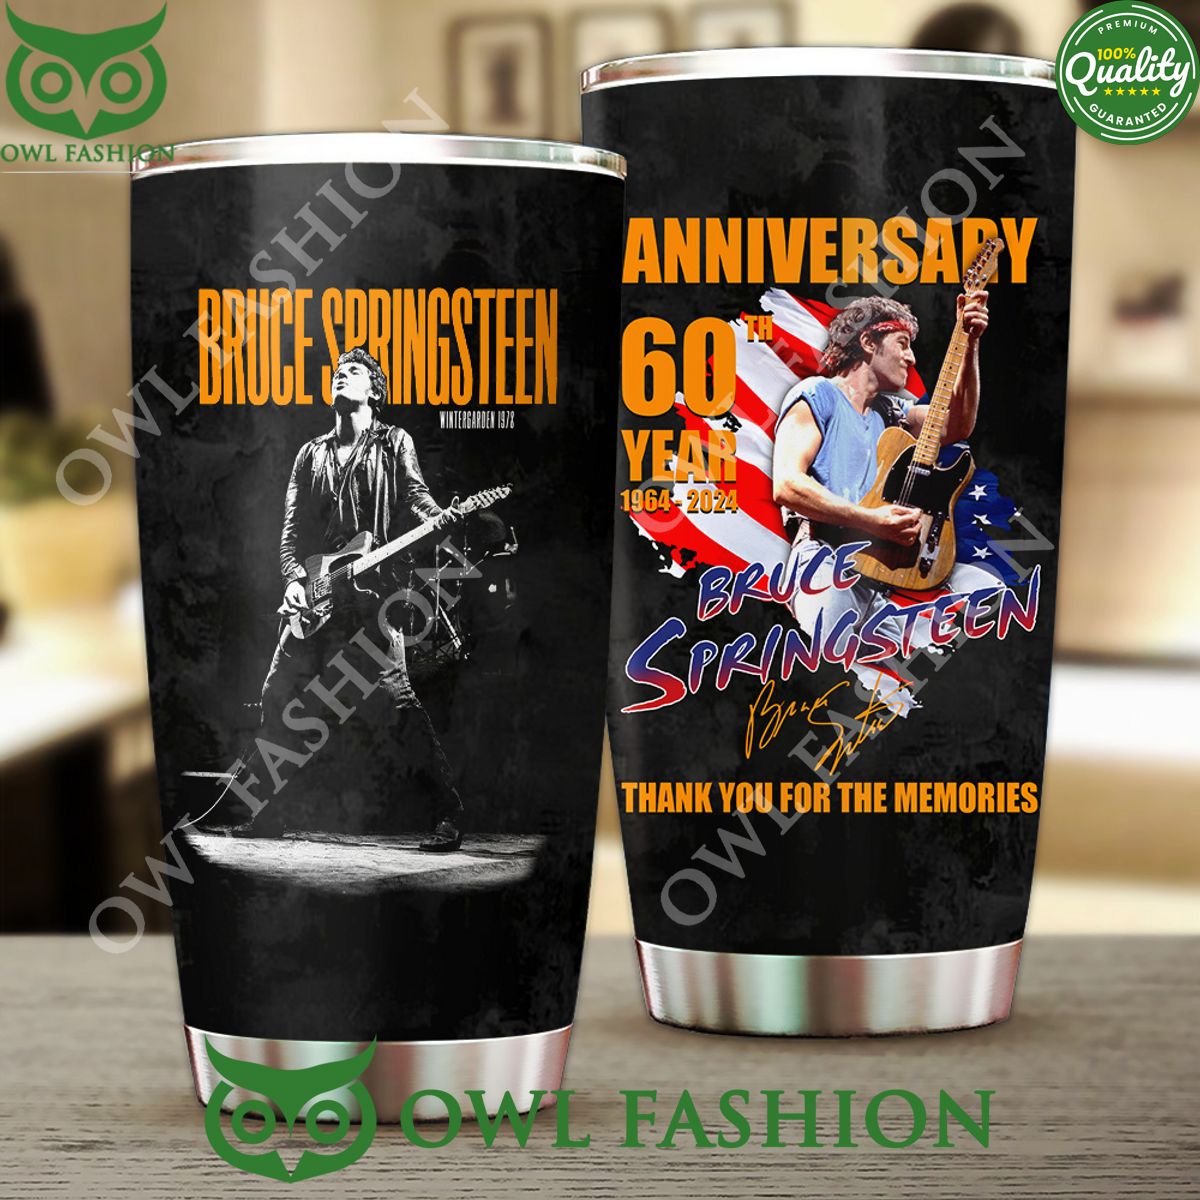 Bruce Springsteen Anniversary 60th Year Tumbler Cup